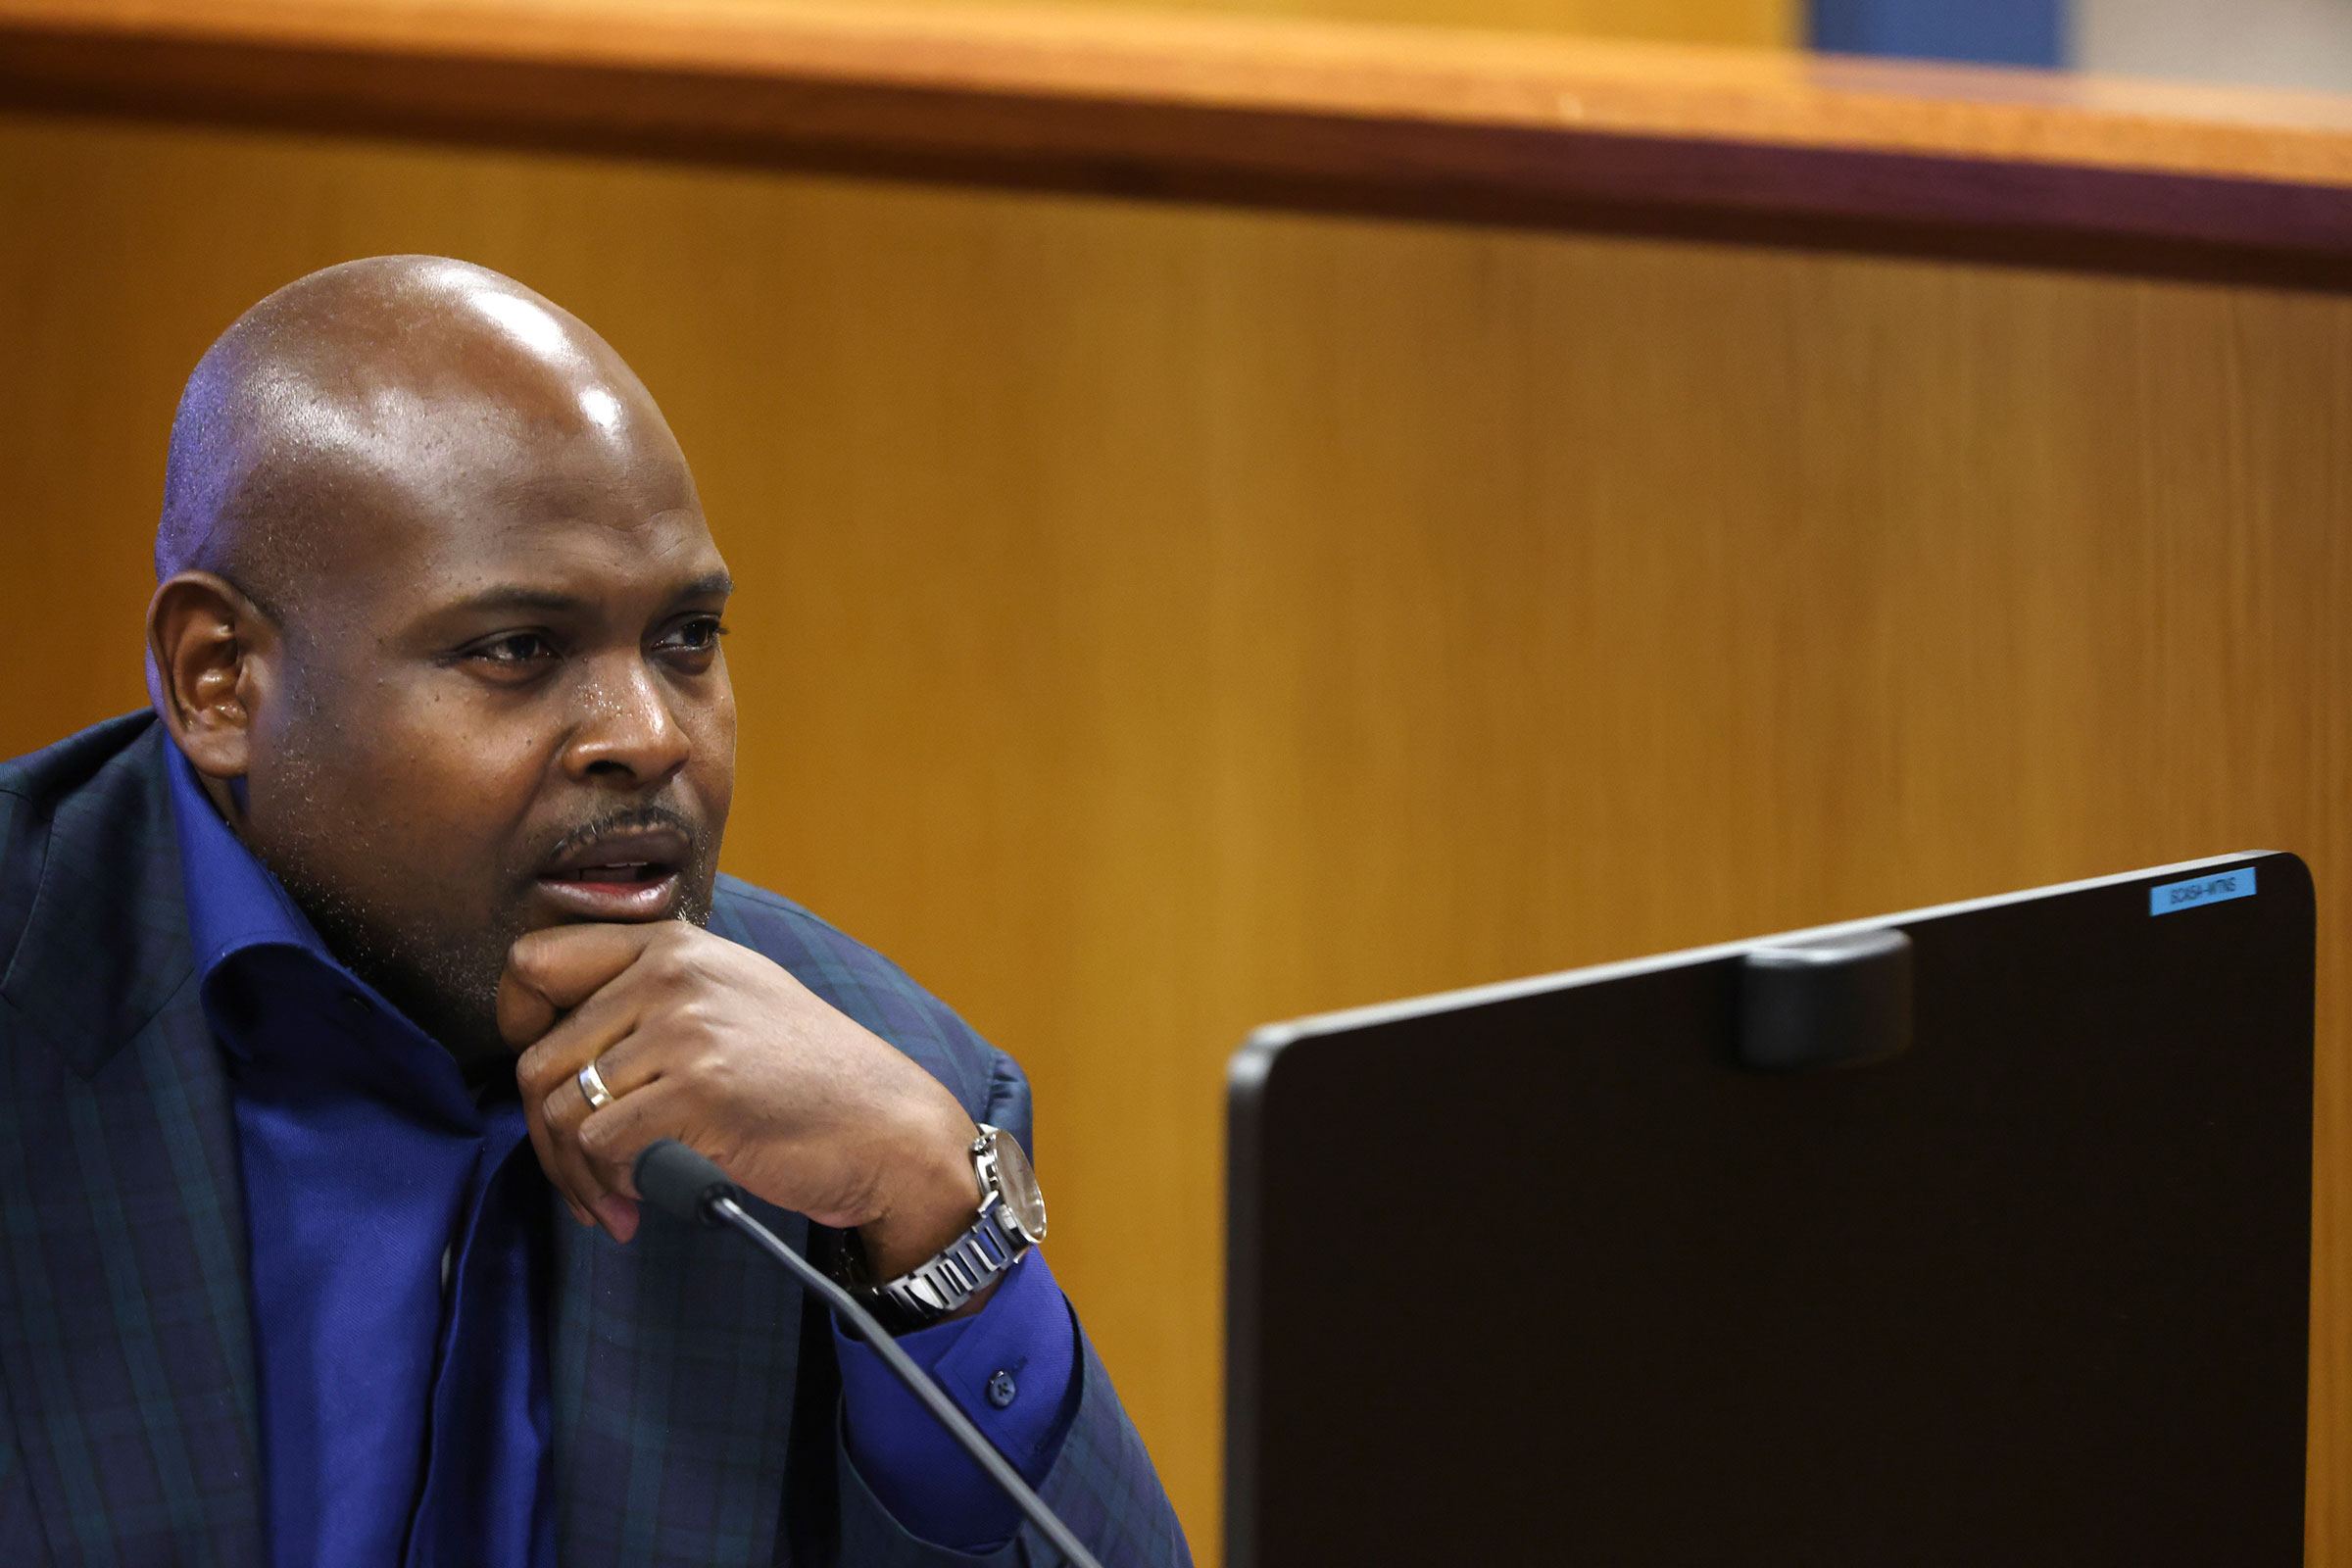 Witness Terrence Bradley looks on from the witness stand during a hearing in the case of the State of Georgia v. Donald John Trump at the Fulton County Courthouse on February 16 in Atlanta.